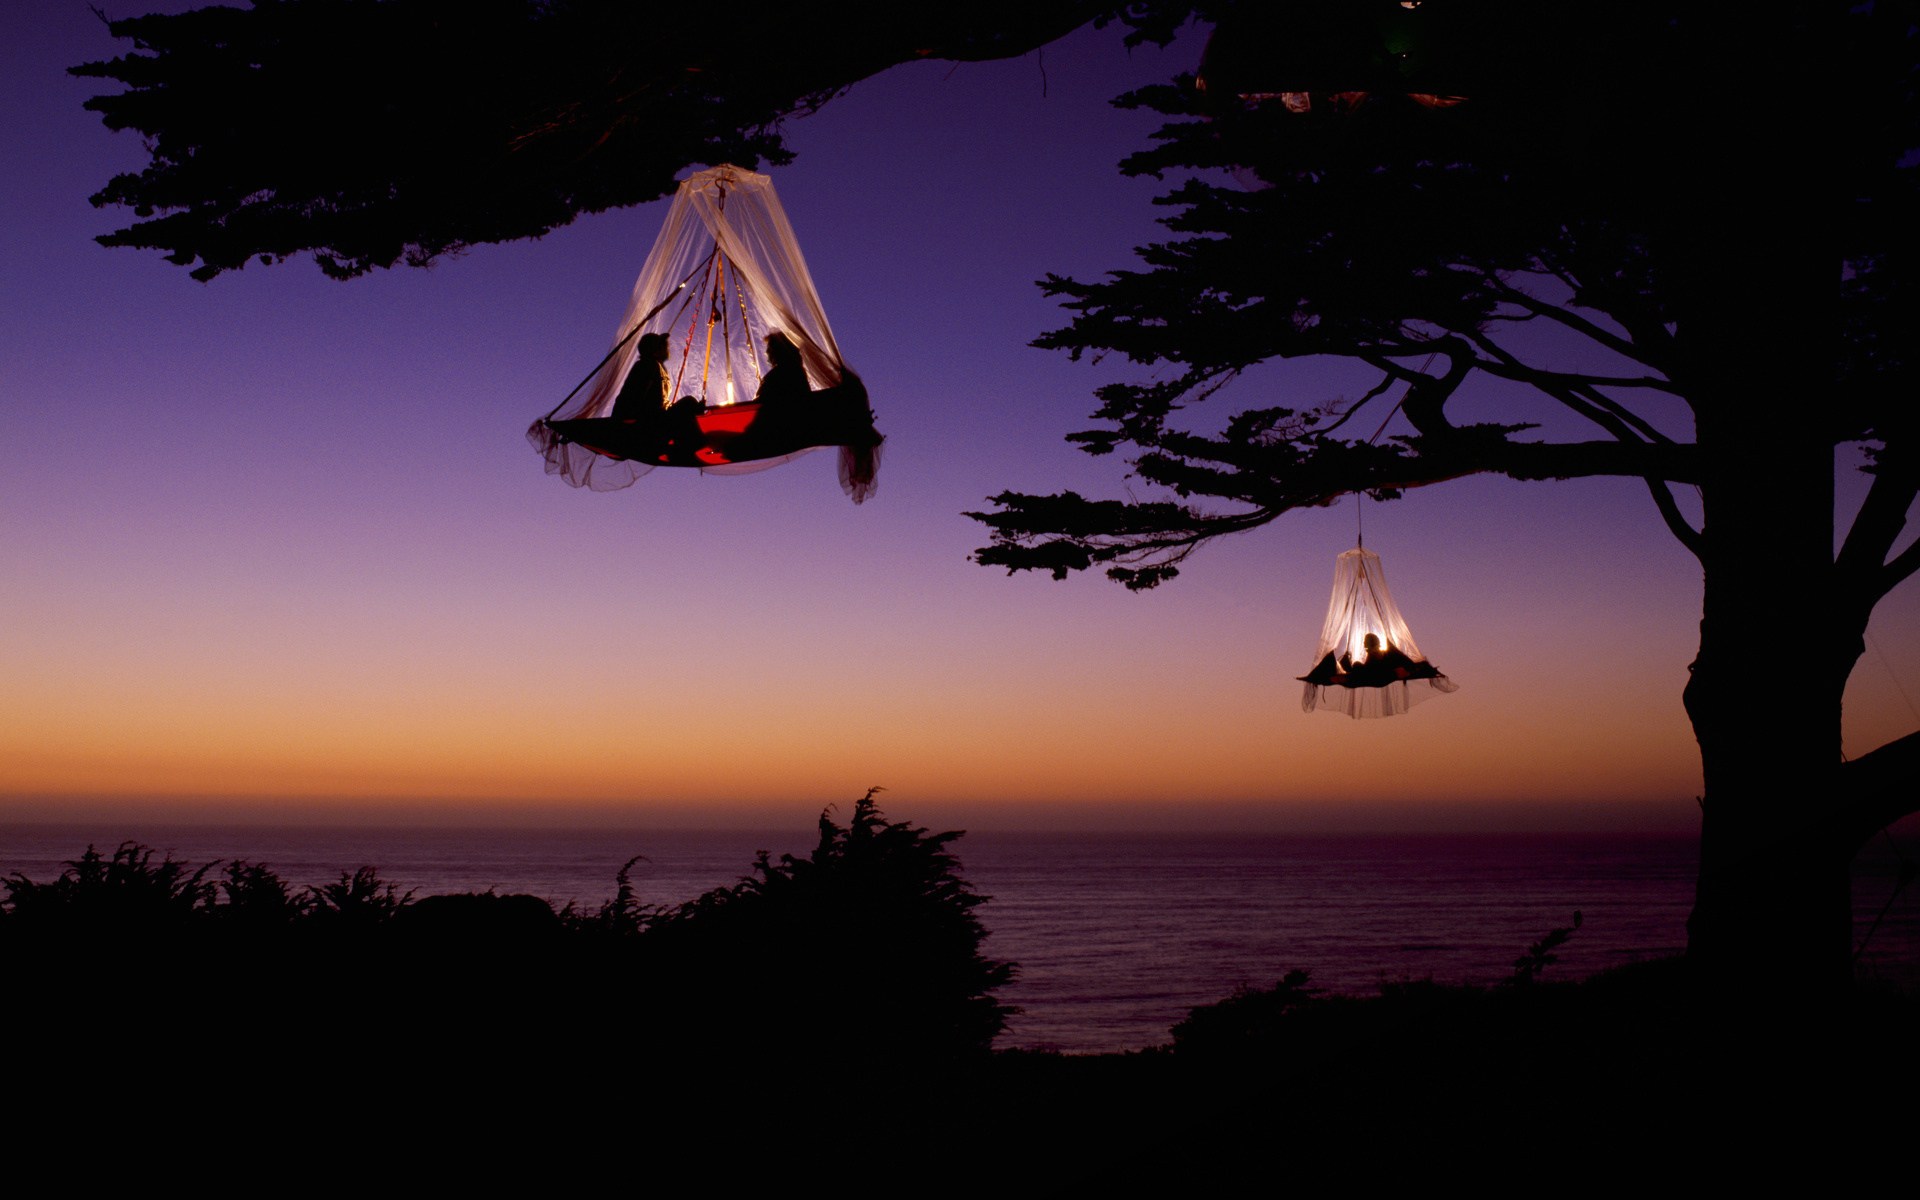 camping in tents hanging from trees